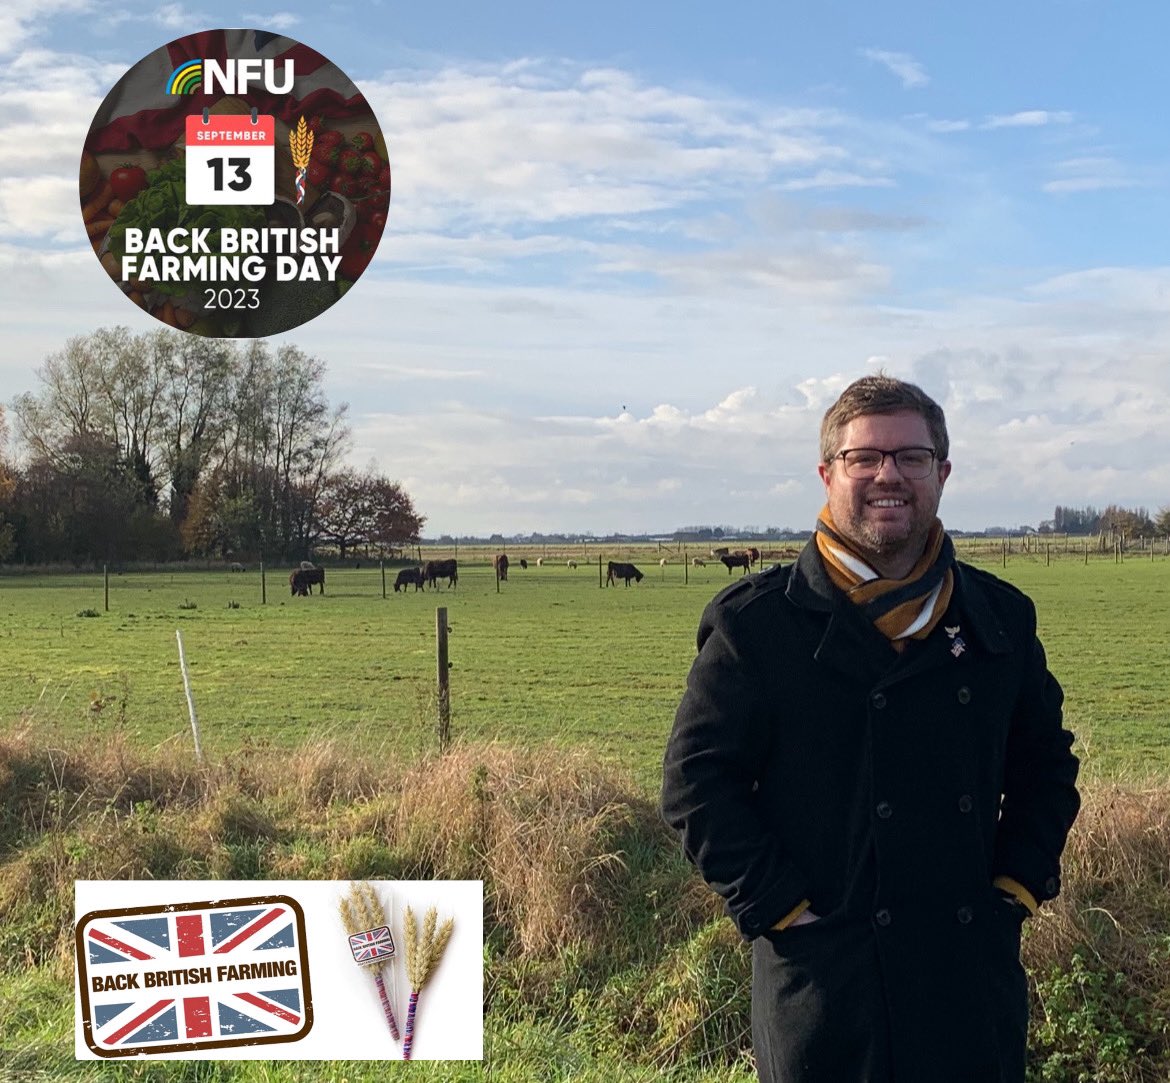 I want to thank all the dedicated and hard-working farmers across North West Norfolk and in our local area for providing us with food and beautiful countryside. #BackBritishFarming 🌾 @NFUEastAnglia